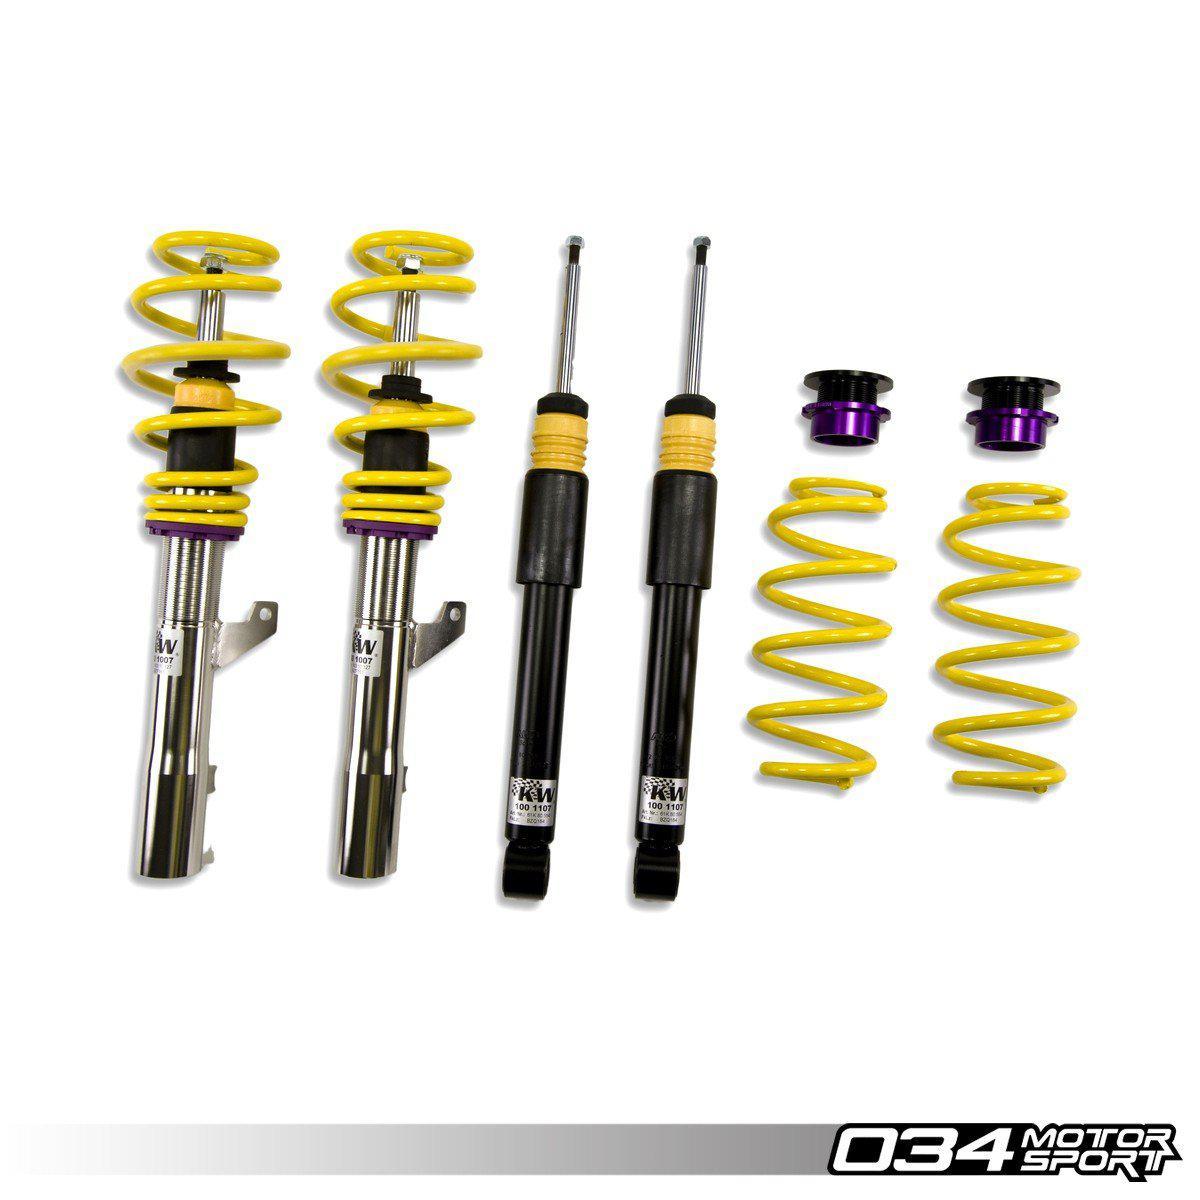 KW Variant 1 Coilover Suspension, MKIV Volkswagen R32-A Little Tuning Co